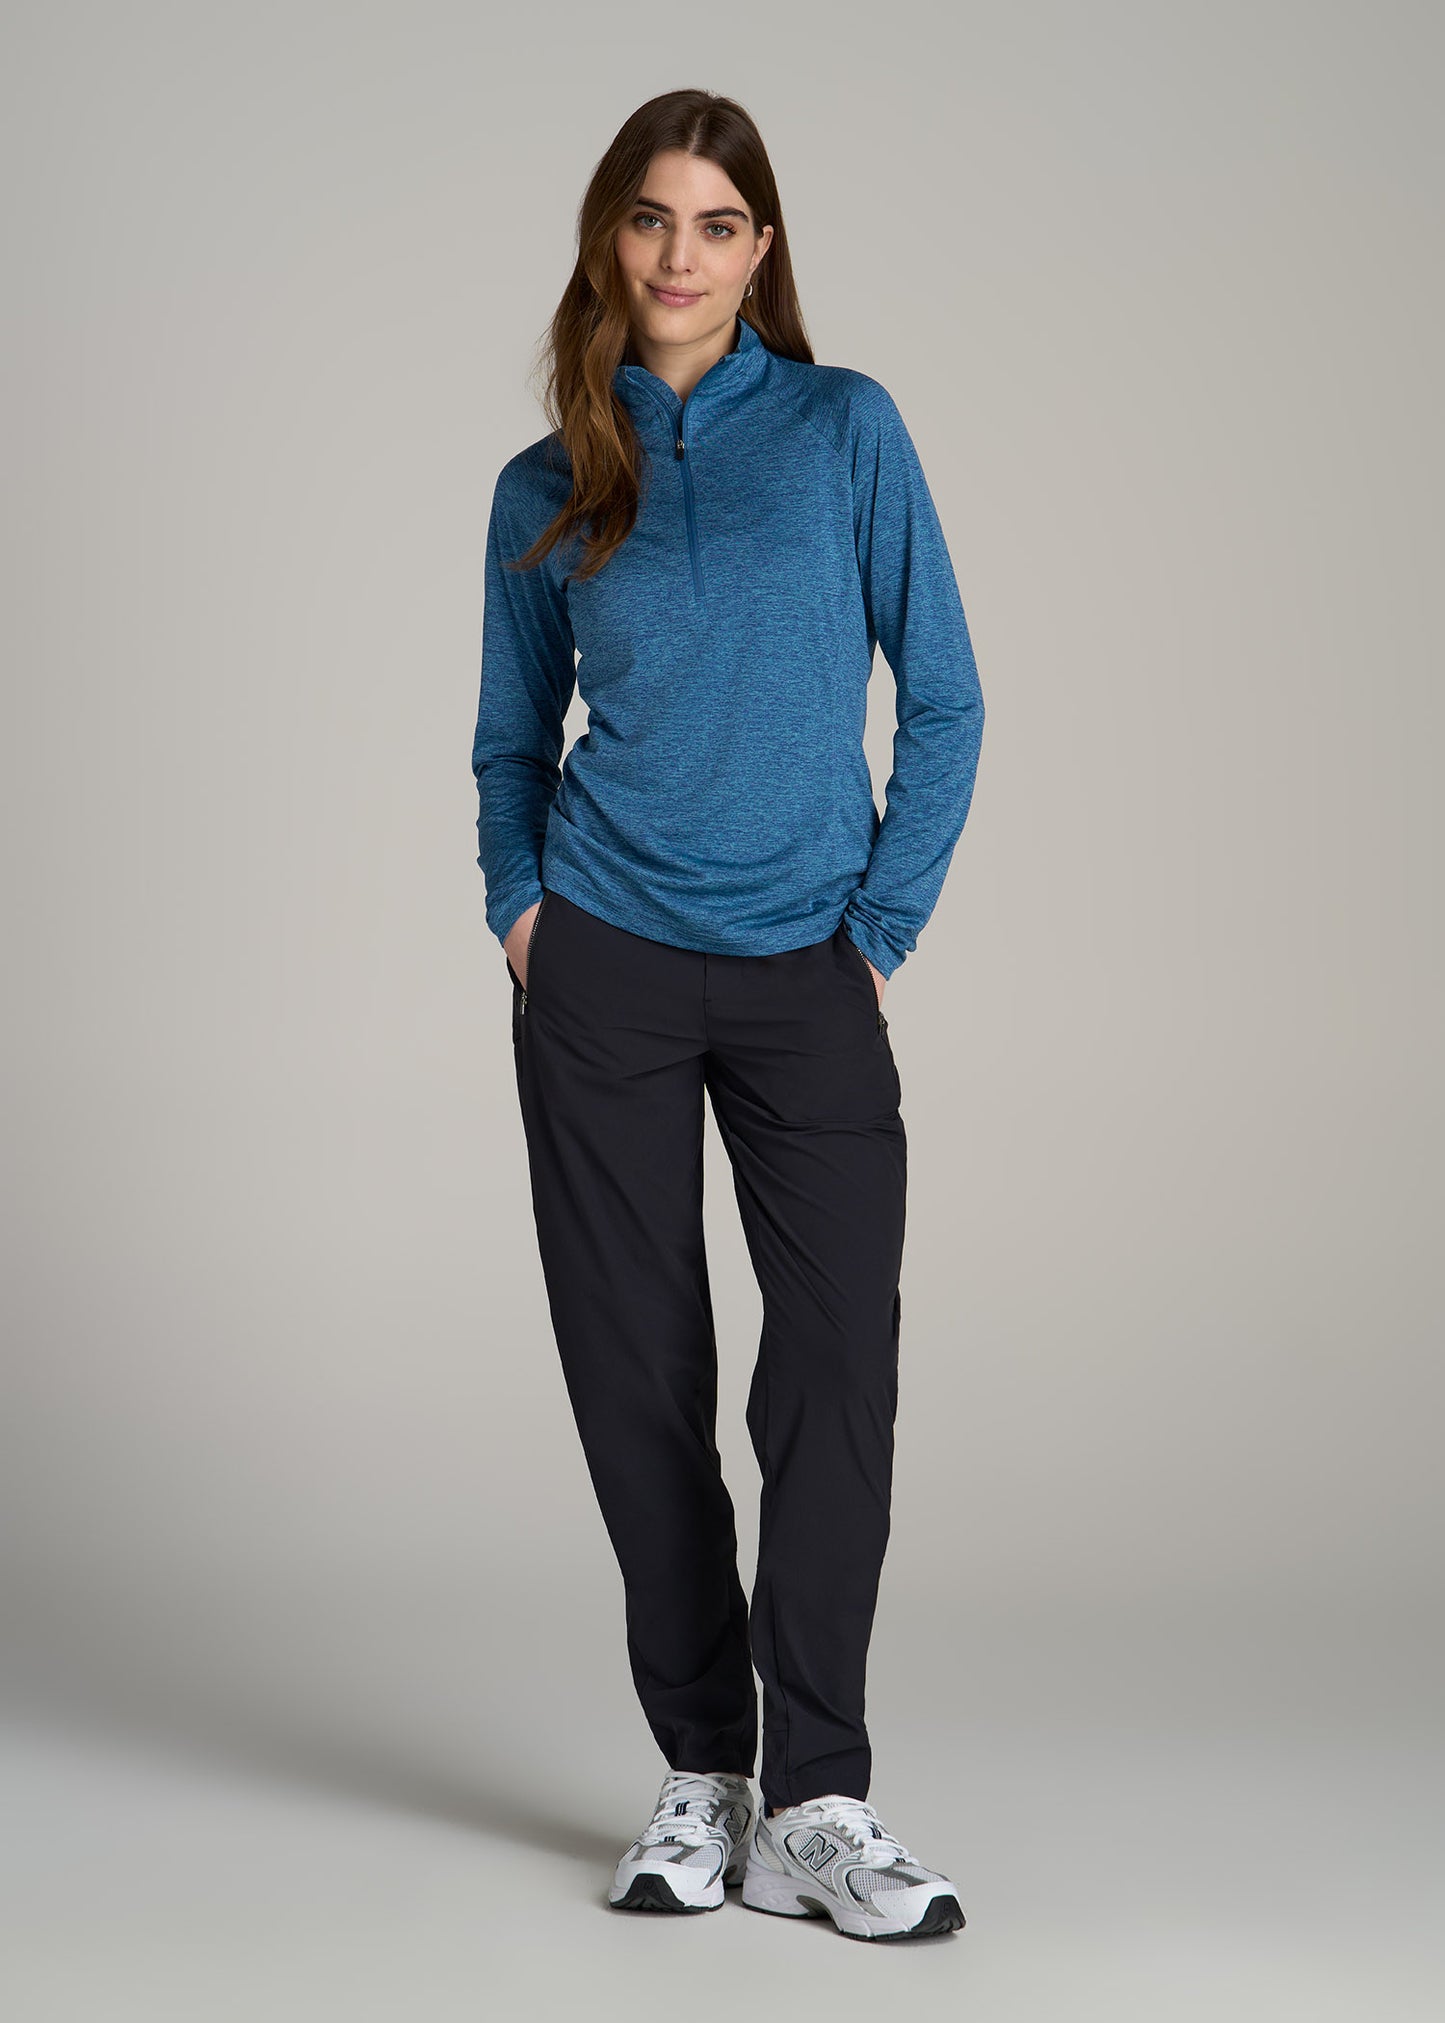 A tall woman wearing Long Sleeve Active Half Zip Pullover Tall Women's Jacket in Ocean Blue Space Dye from American Tall